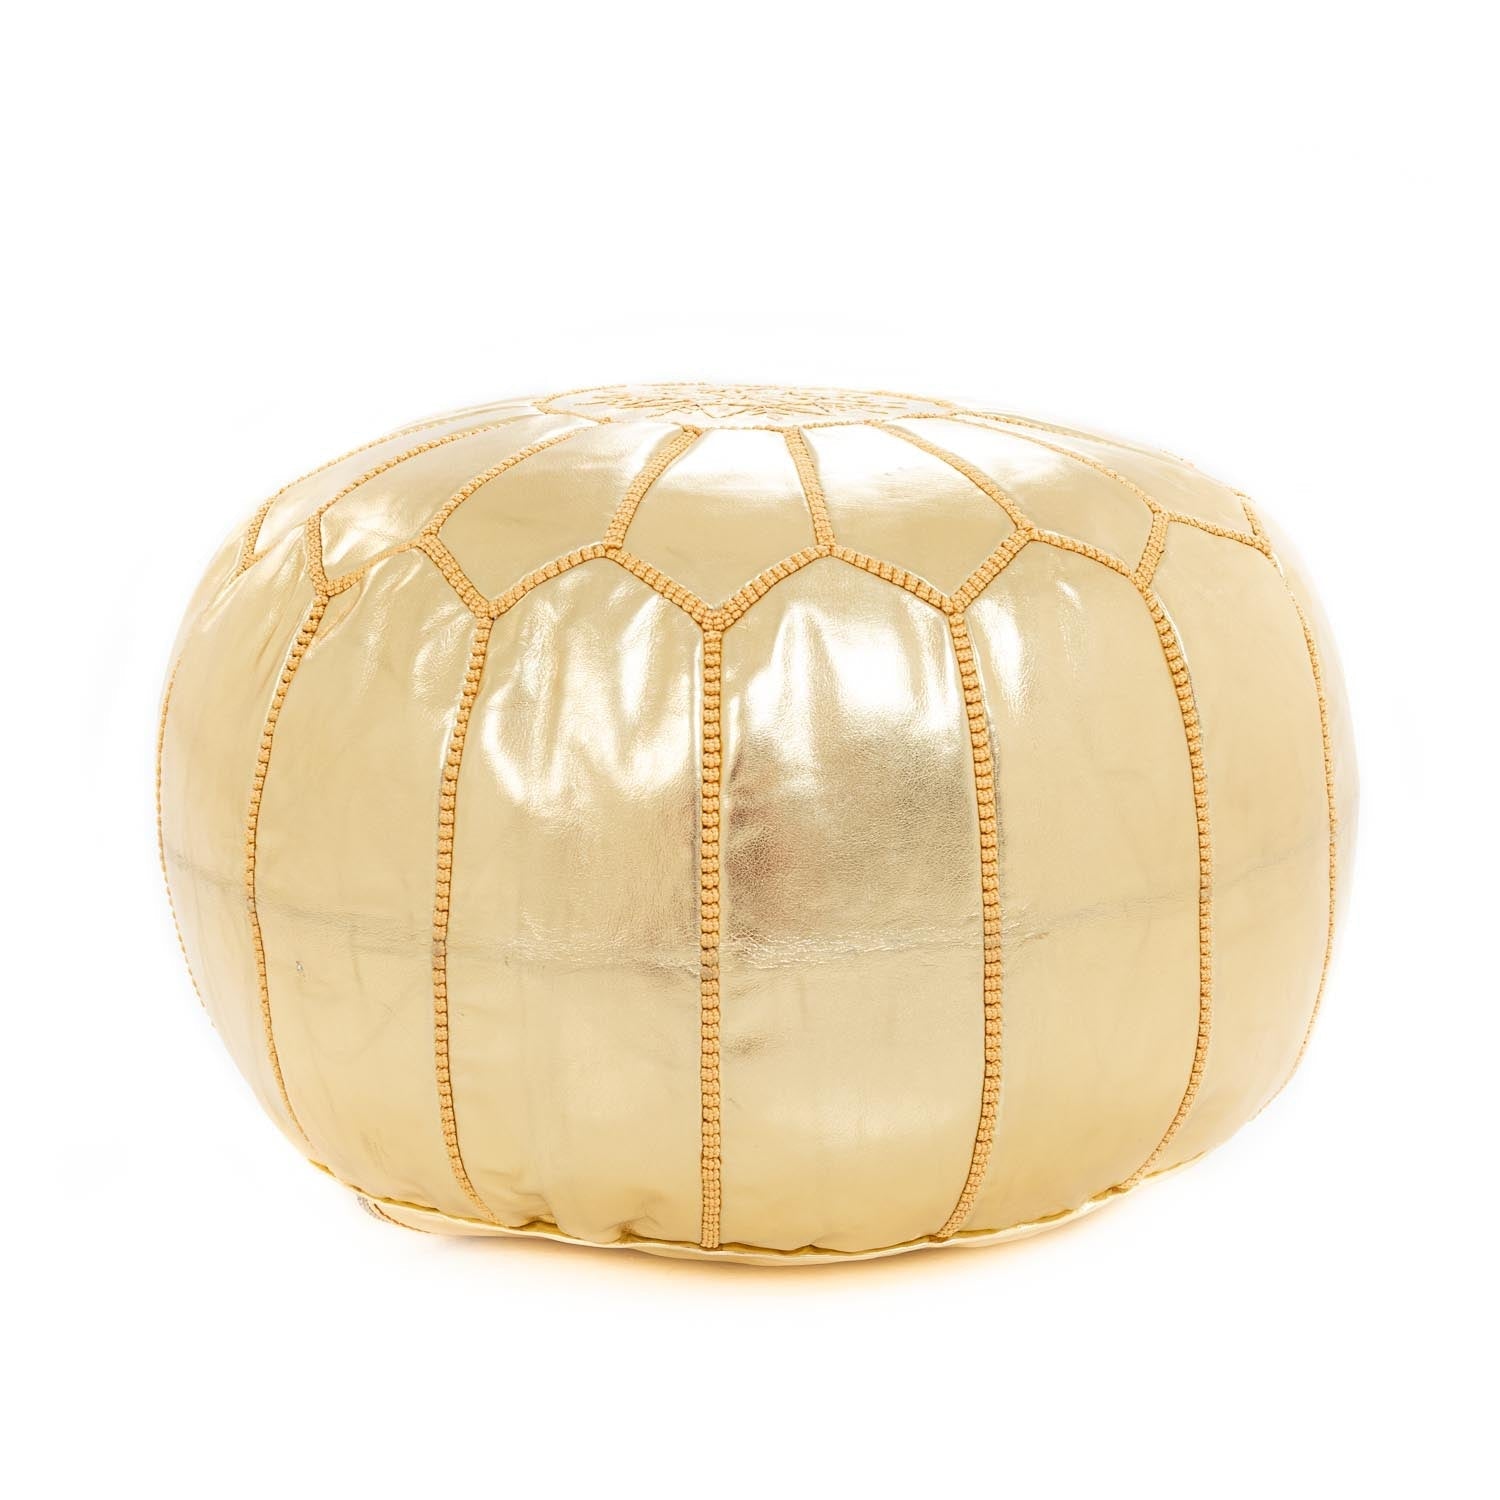 Authentic Moroccan Leather Pouf - Gold - Benisouk